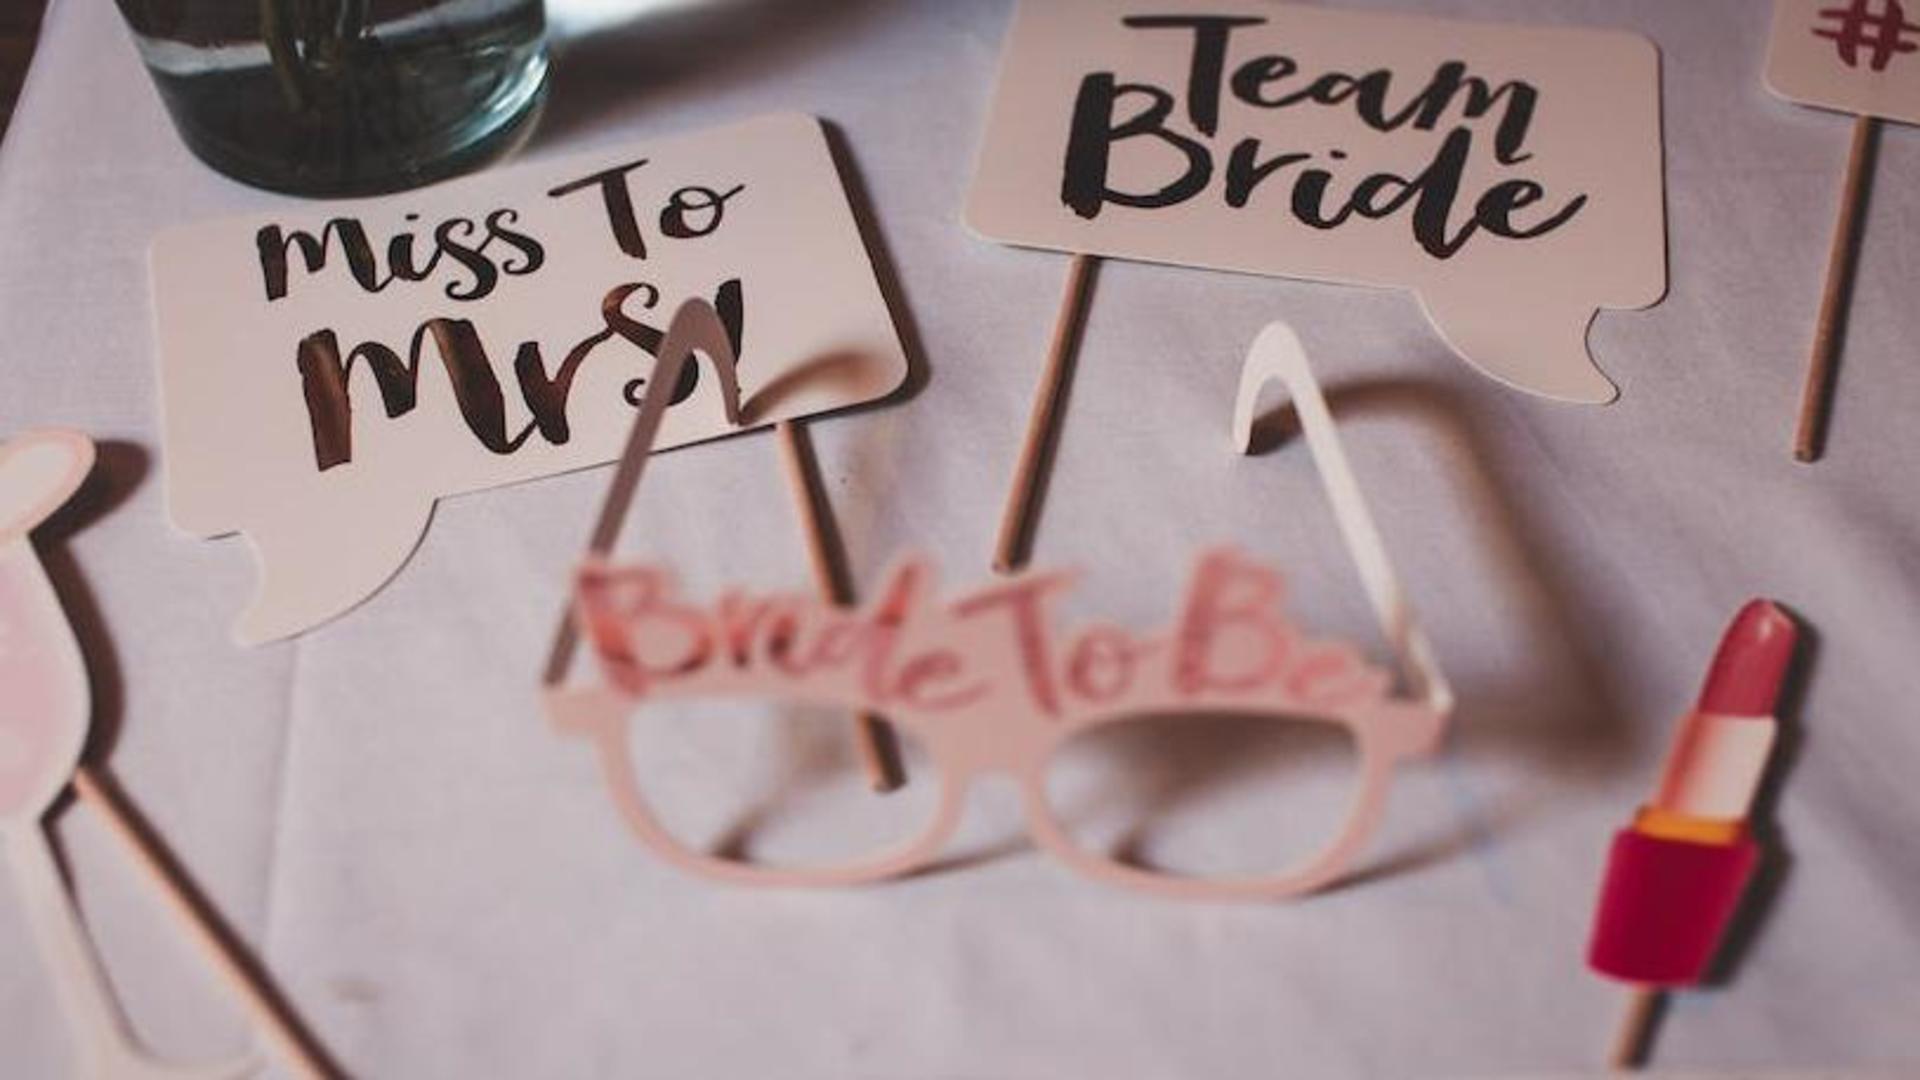 Planning a party for a bride-to-be? Here are some ideas